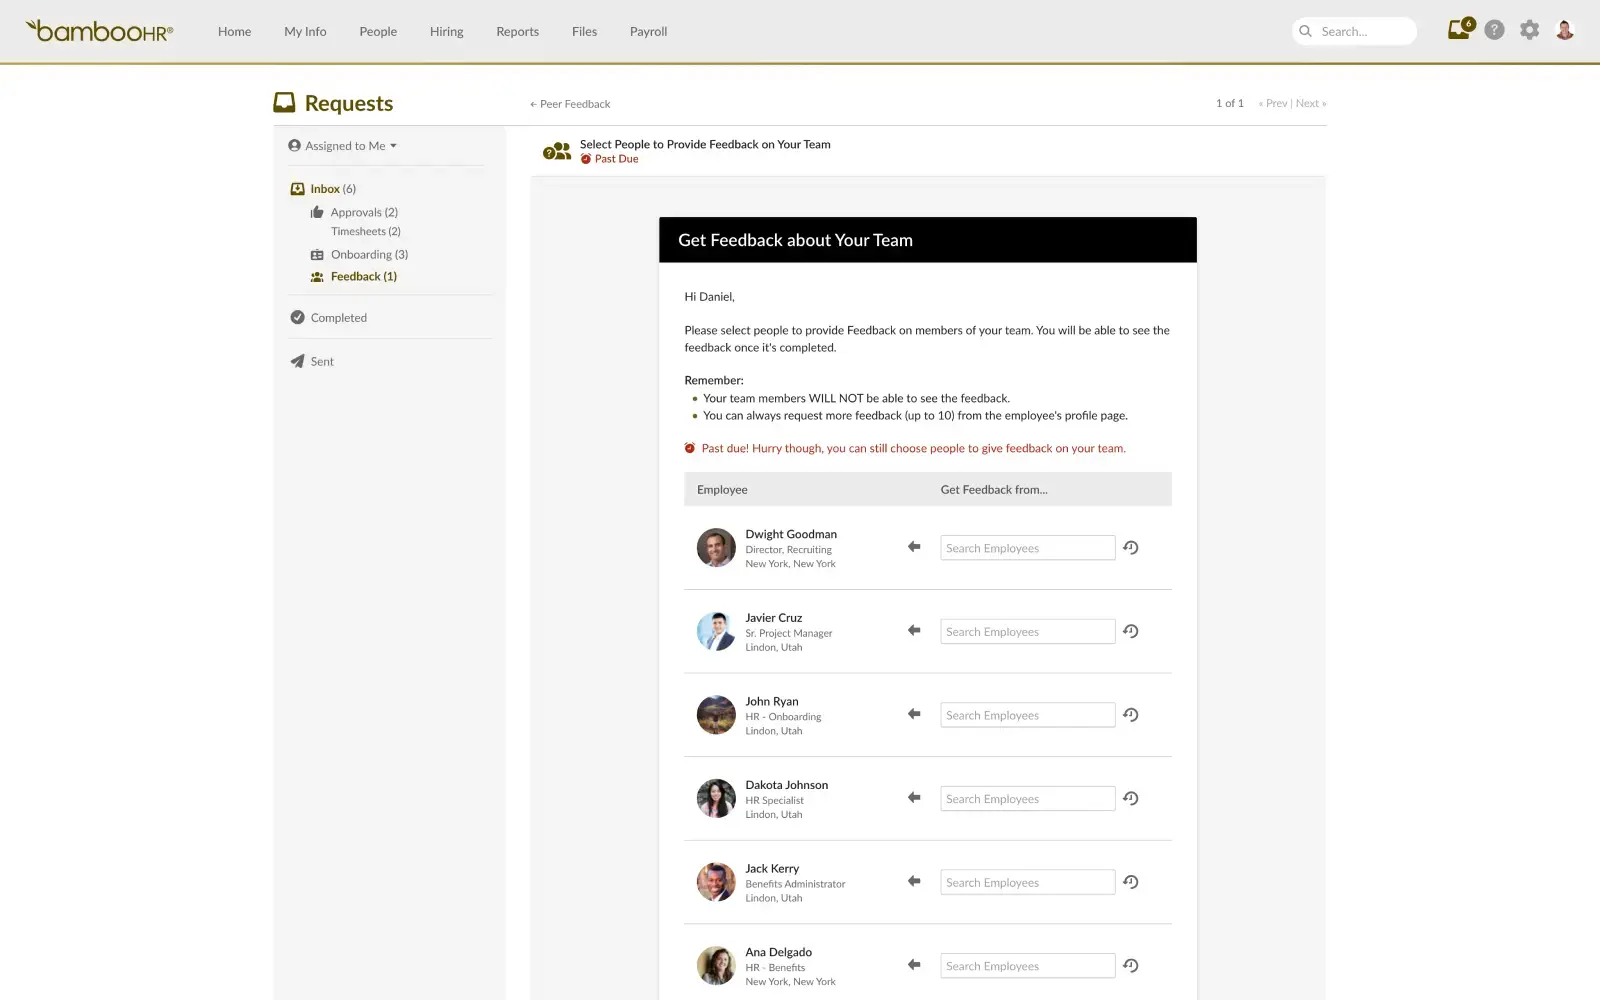 The BambooHR platform shows a list of employees you can collect feedback from.